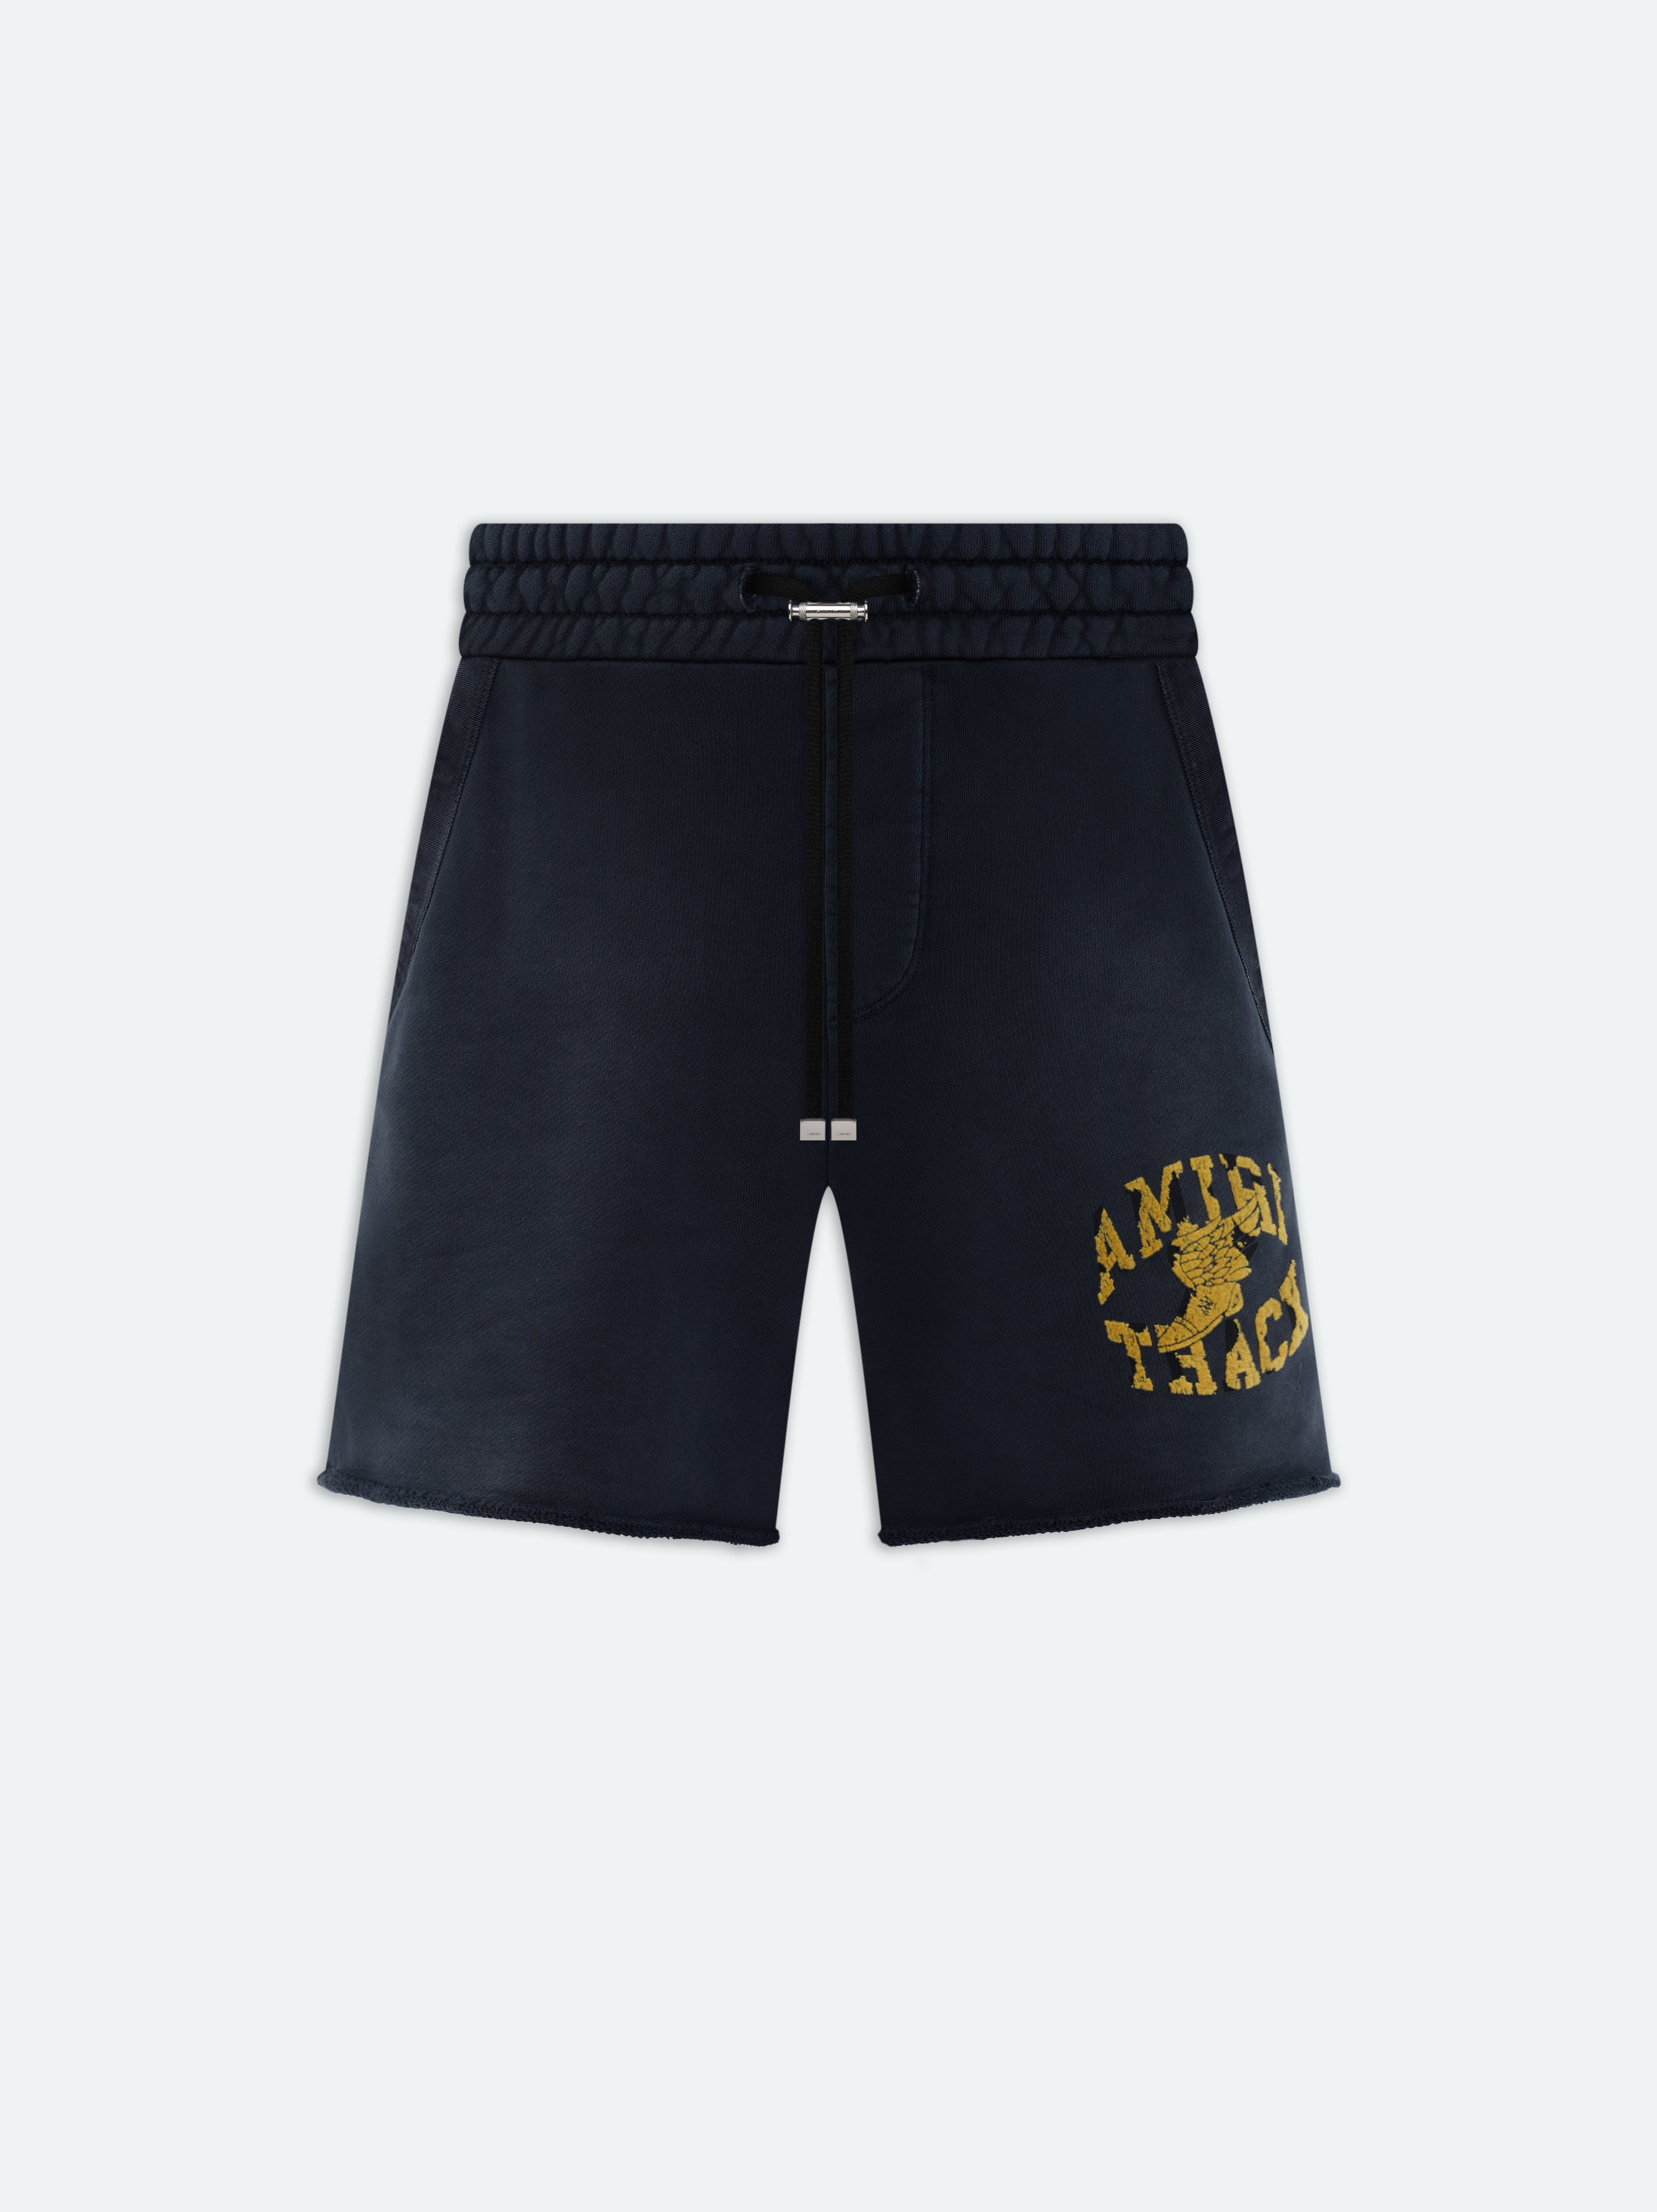 Product AMIRI TRACK SHORT - Faded Black featured image